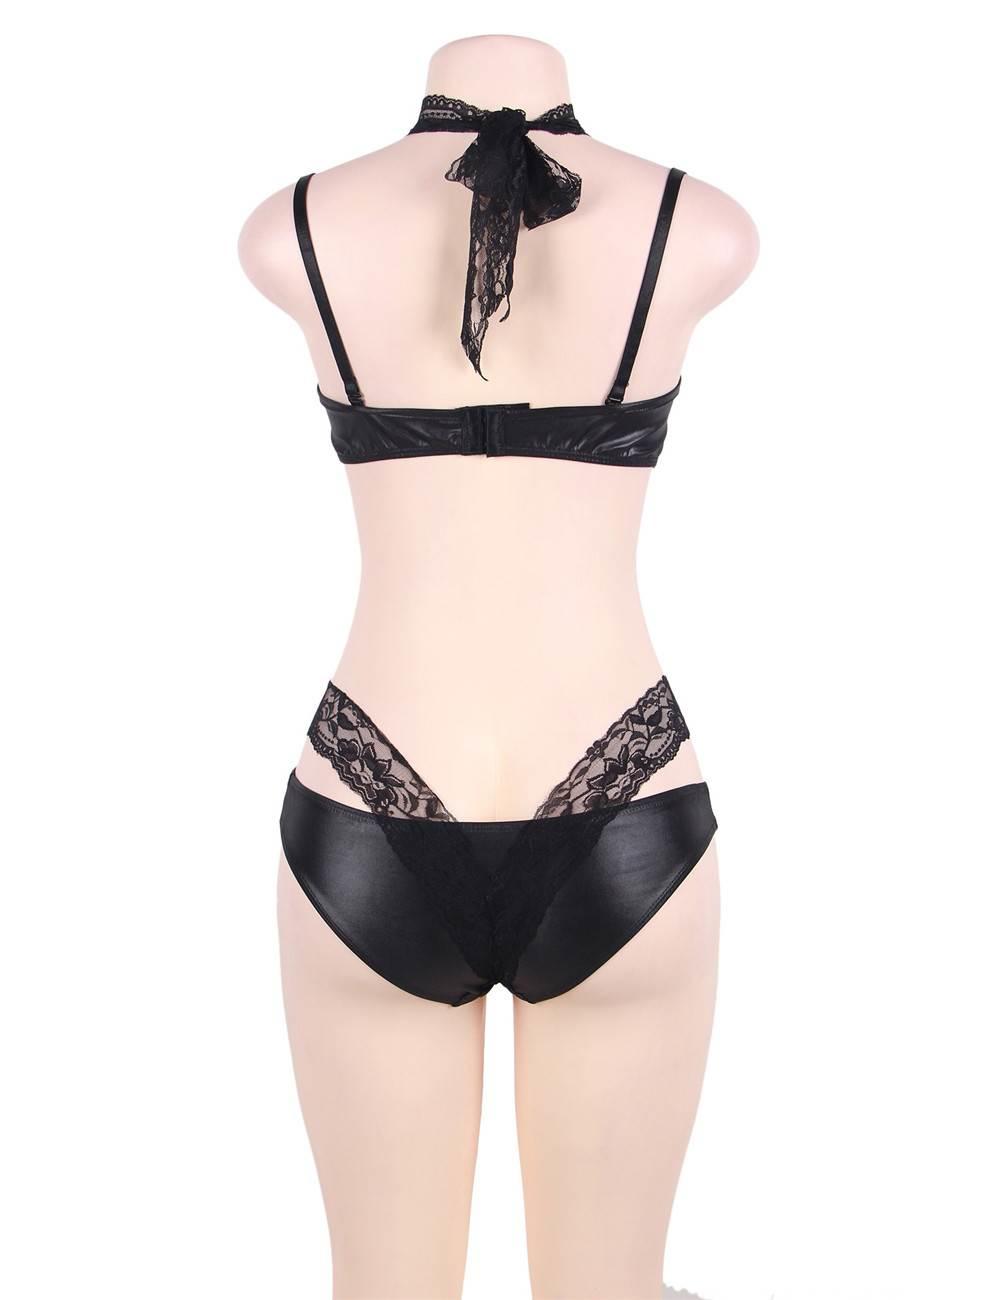 Plus Size PVC & Lace Bra & Brief Set from behind